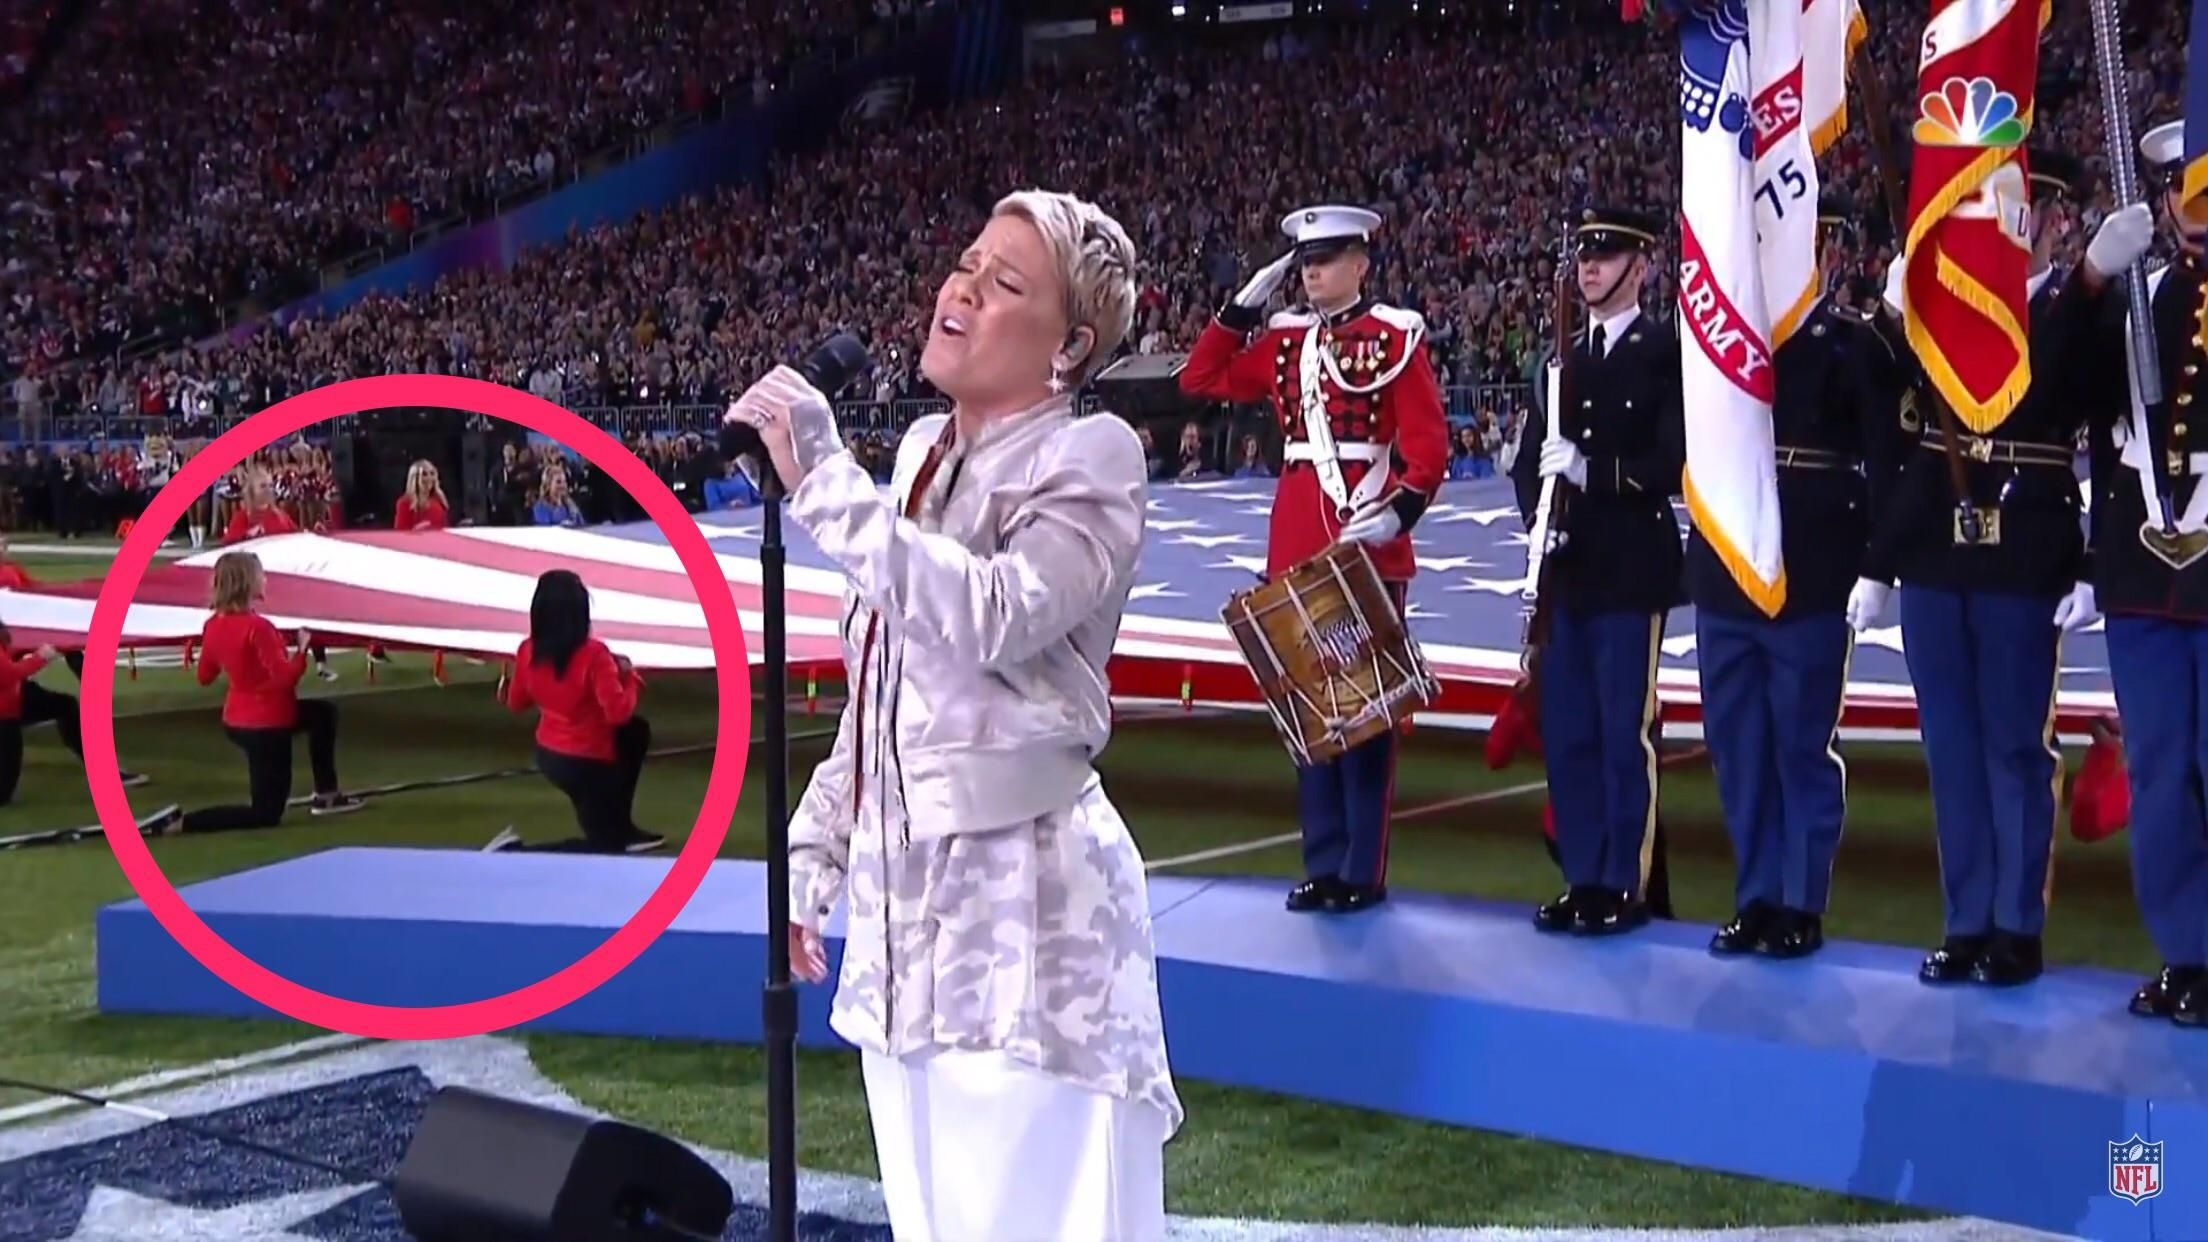 Woman caught disrespecting the national anthem at the Super Bowl